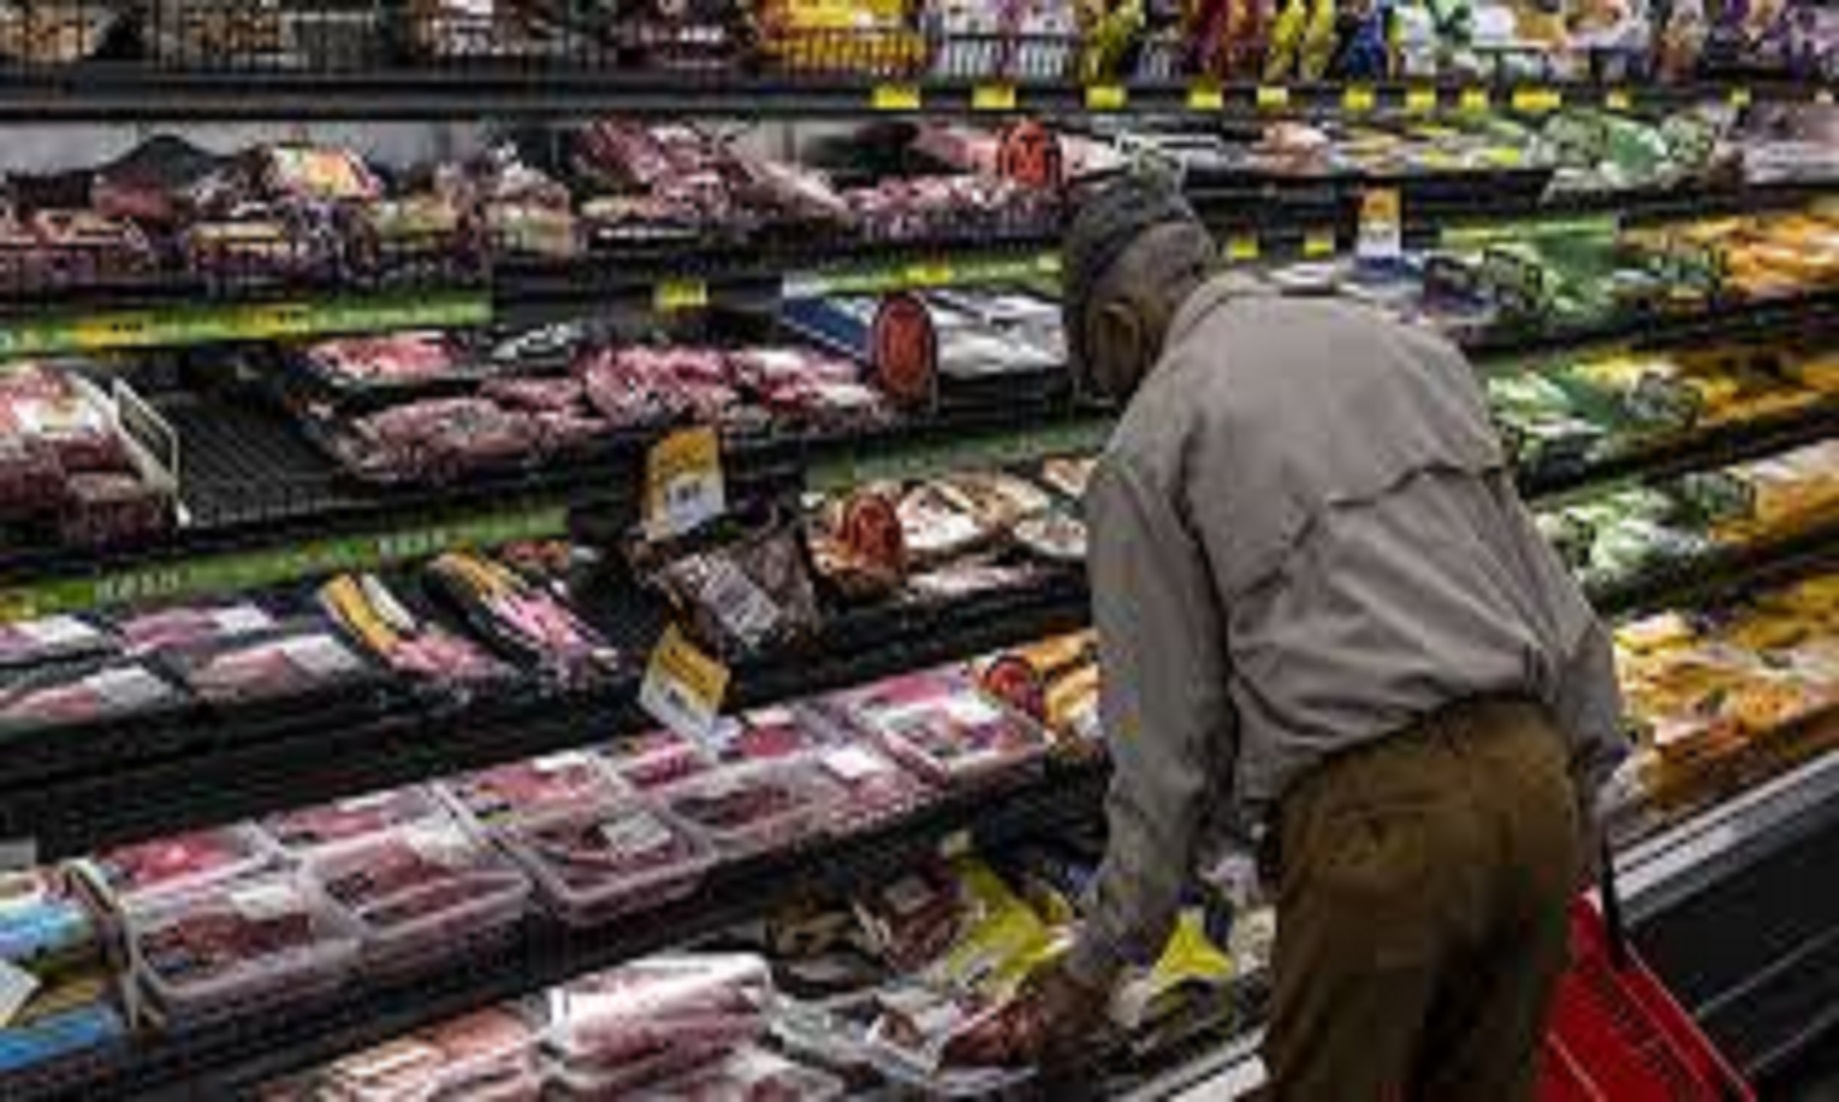 New Zealand’s Annual Food Price Increase Remains High At 6.4 Percent